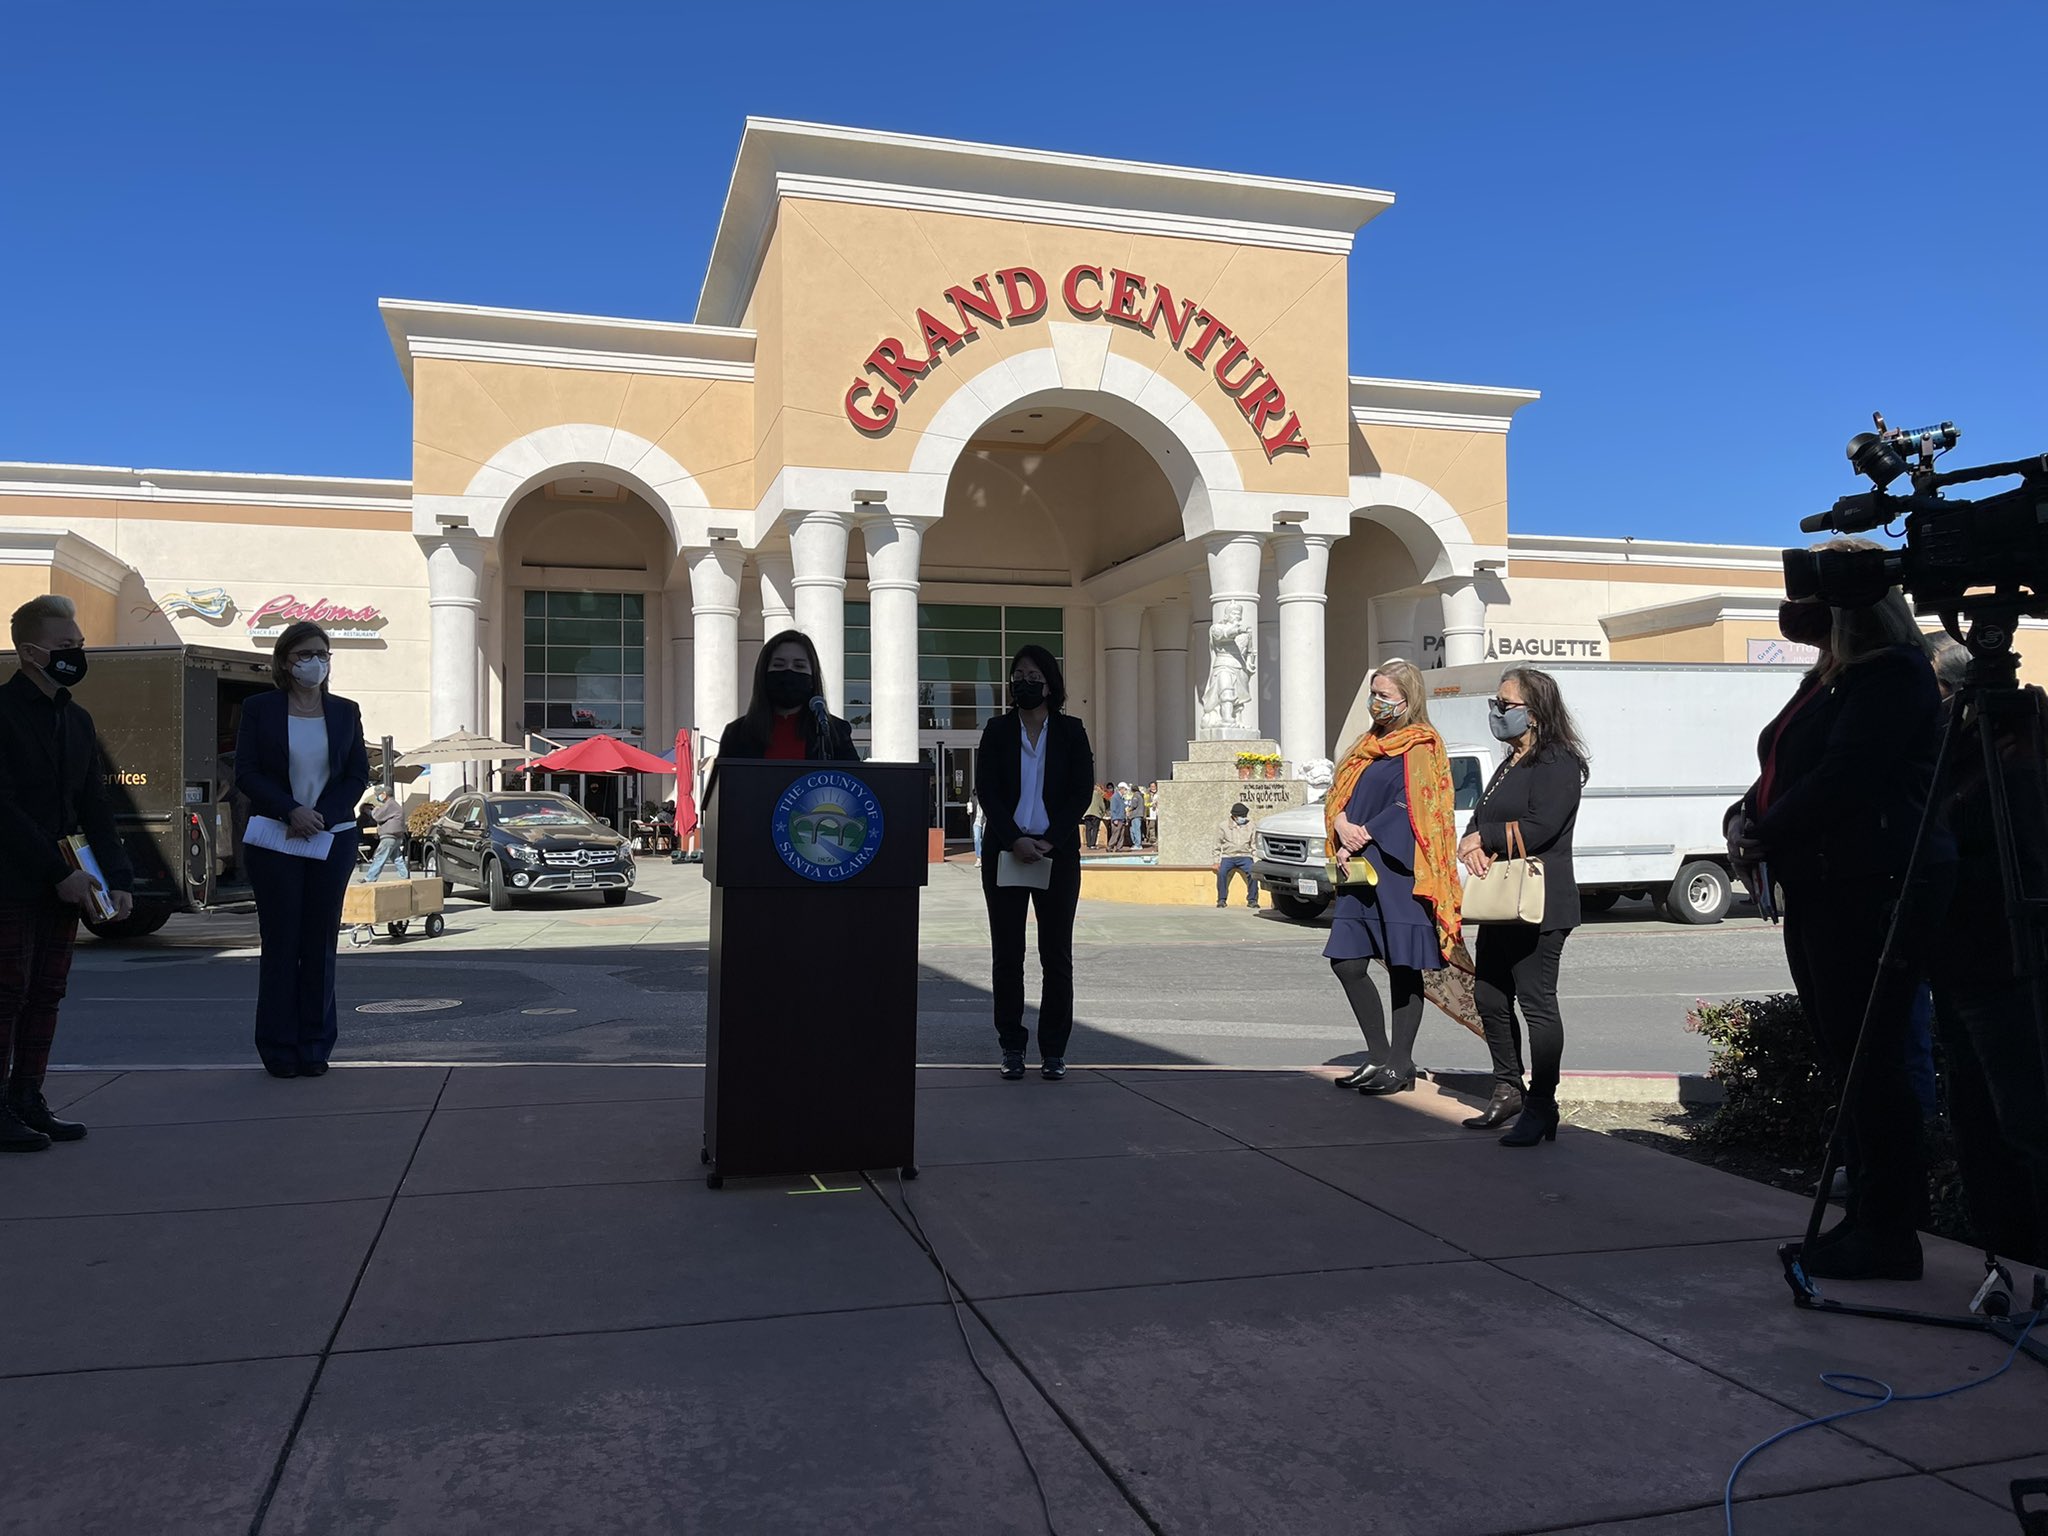 Kiet Do on X: Grand Century Mall in San Jose says there will be